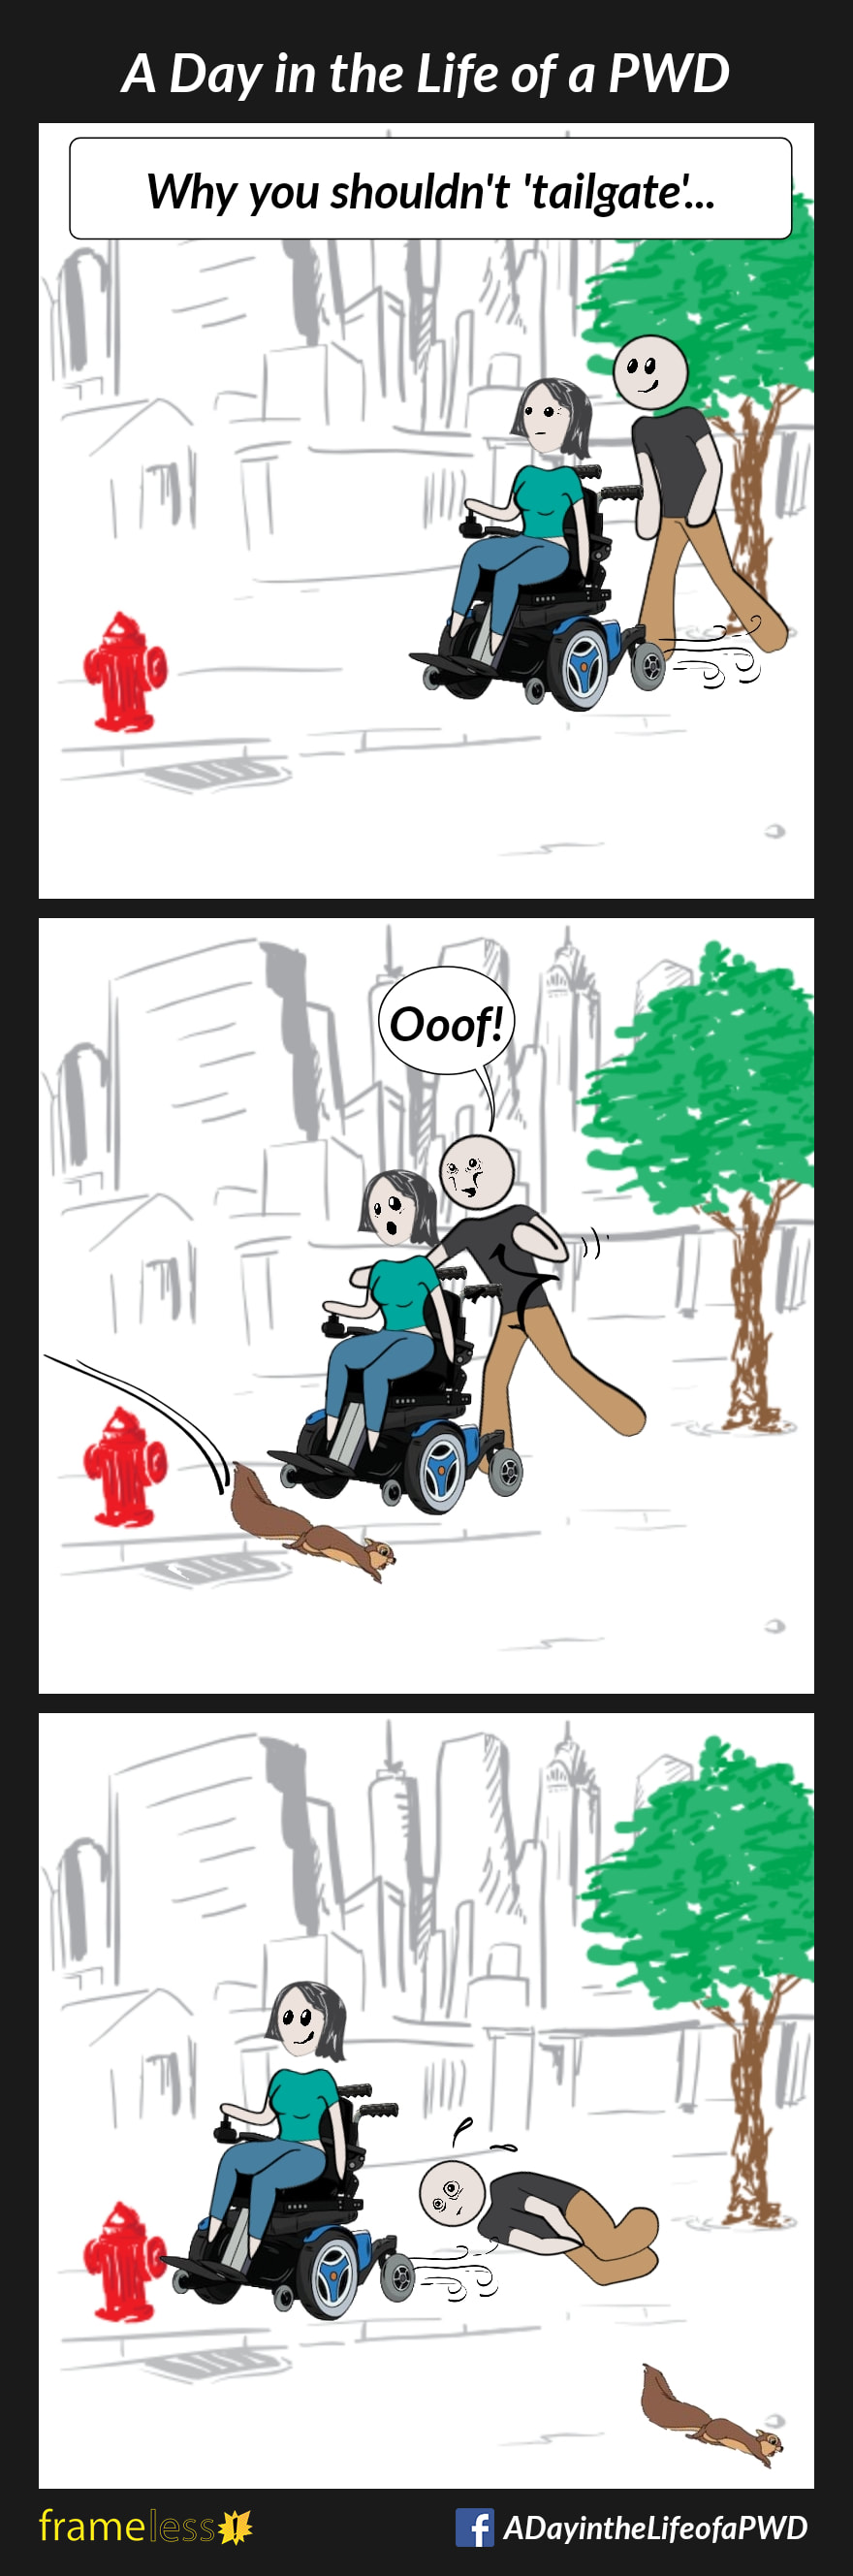 COMIC STRIP 
A Day in the Life of a PWD (Person With a Disability) 

Frame 1:
CAPTION: Why you shouldn't 'tailgate'...
A woman in a power wheelchair is traveling down a sidewalk. Her husband is walking close behind.

Frame 2:
A squirrel runs across the sidewalk in front of her, and the woman stops suddenly. Unprepared, the husband walks into the back of the chair and is winded by the handle.

Frame 3:
The squireel runs off and the woman continues on, leaving hubby lying on the sidewalk.